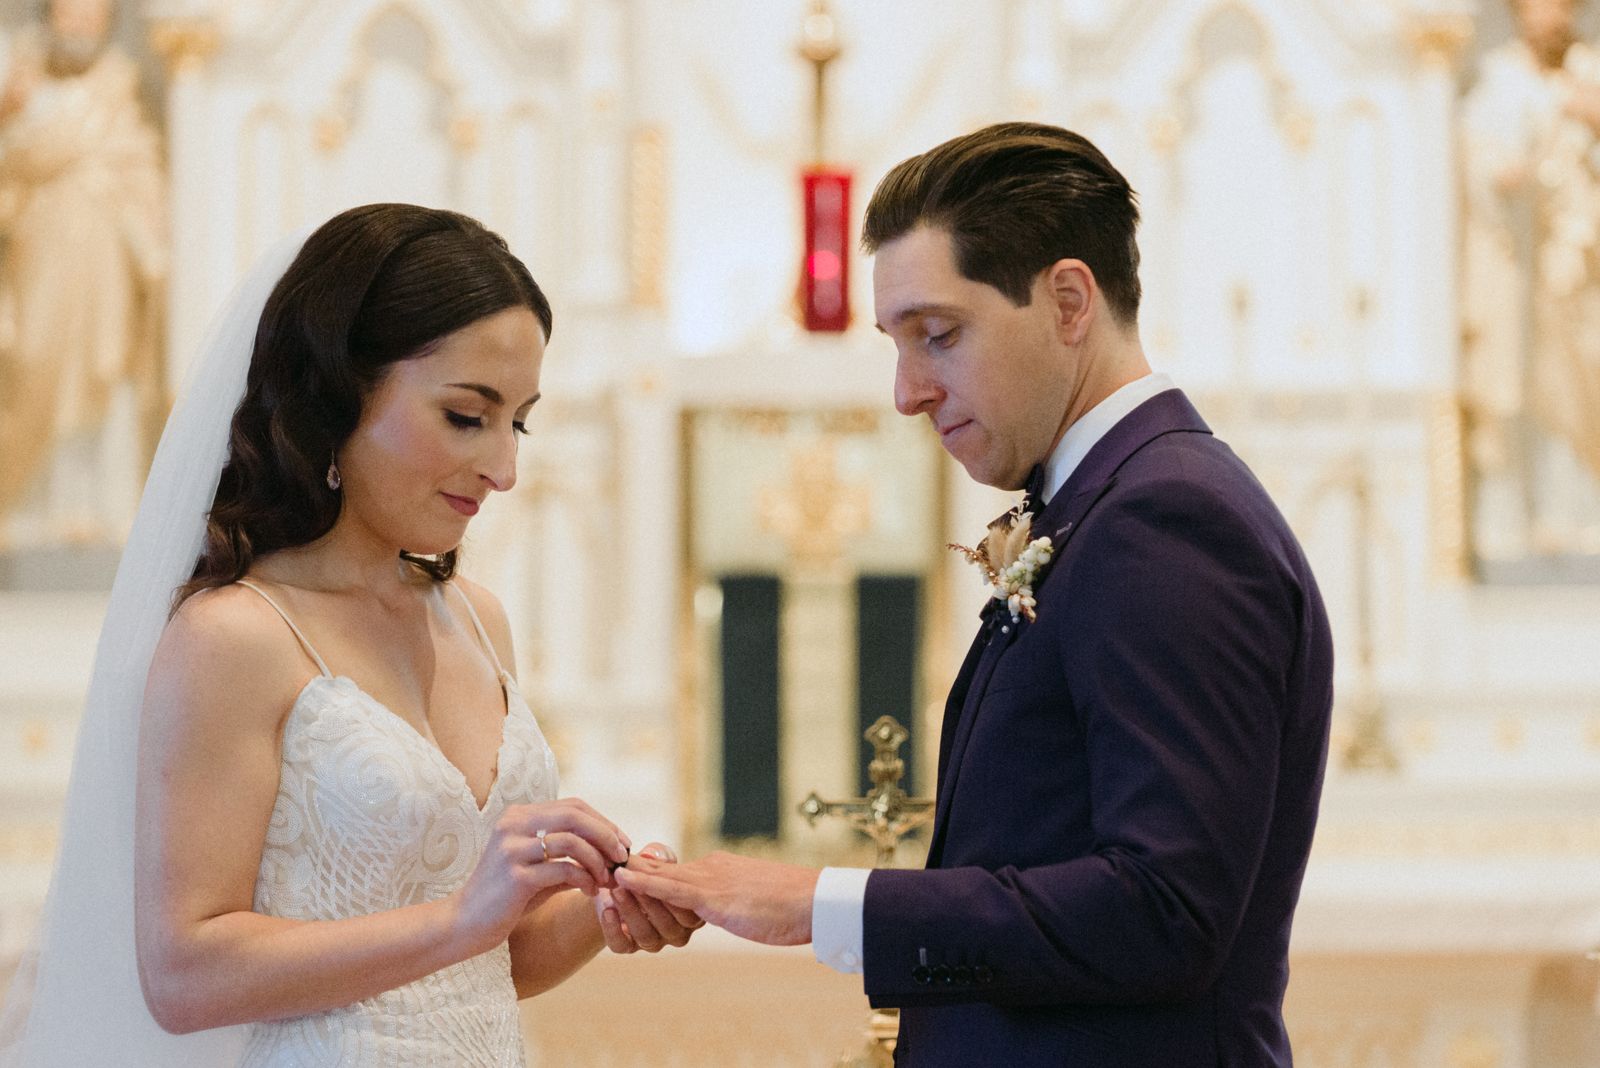 bride putting on the groom's wedding band during church wedding ceremony